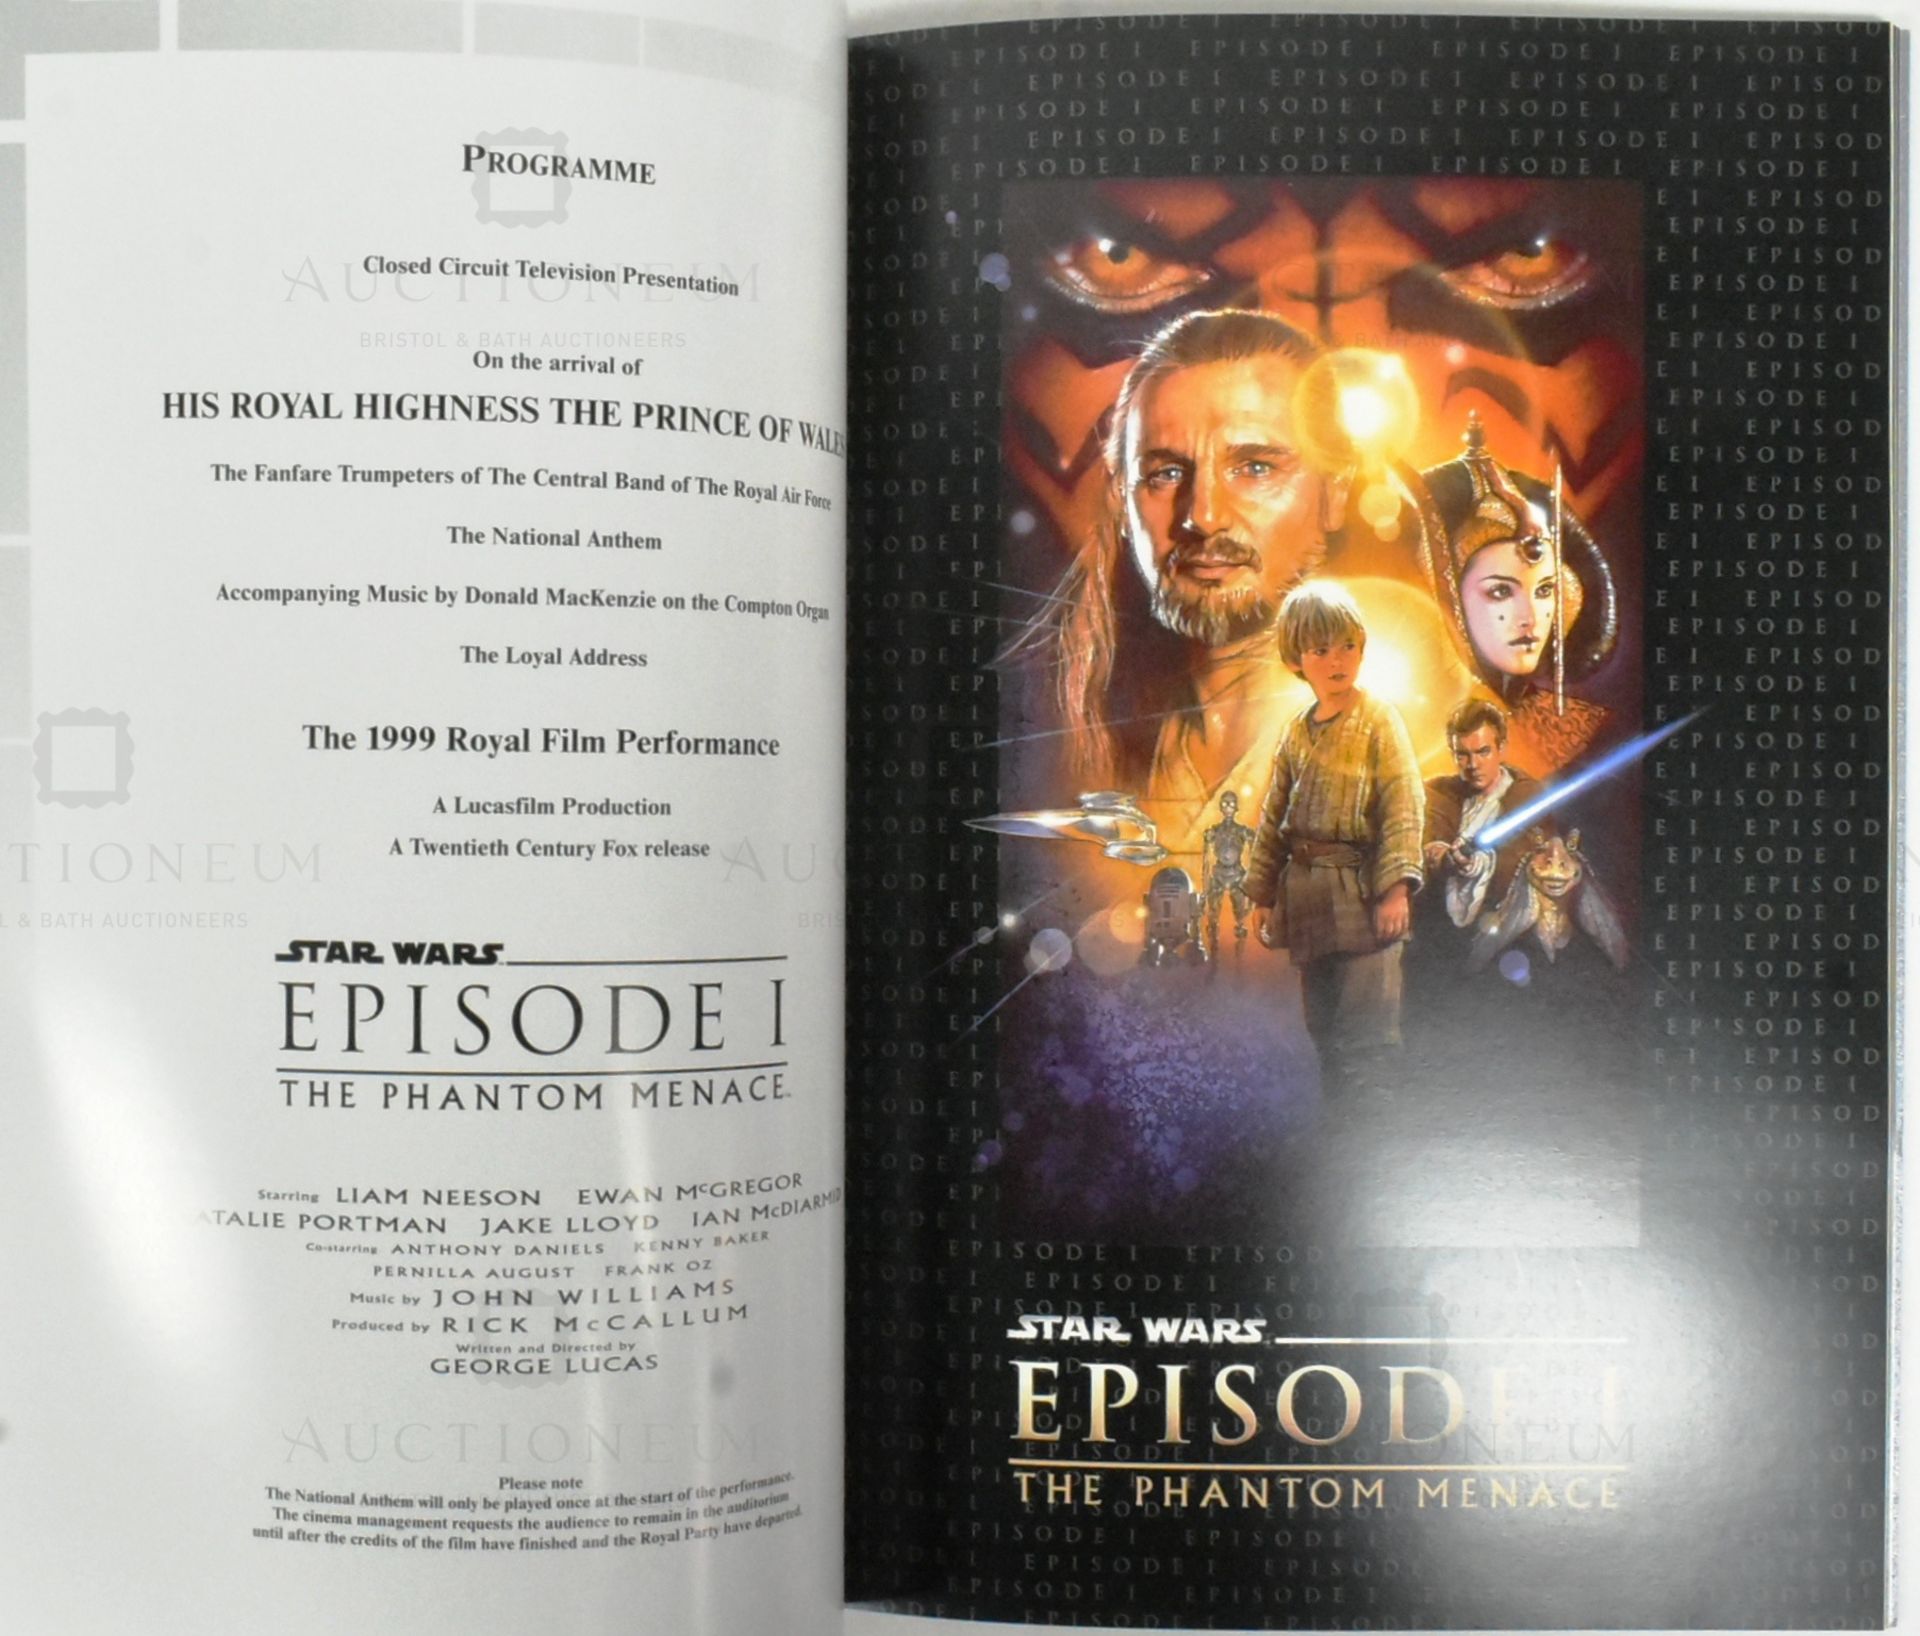 ESTATE OF DAVE PROWSE - PERSONAL PHANTOM MENACE PREMIERE PROGRAMME - Image 5 of 6